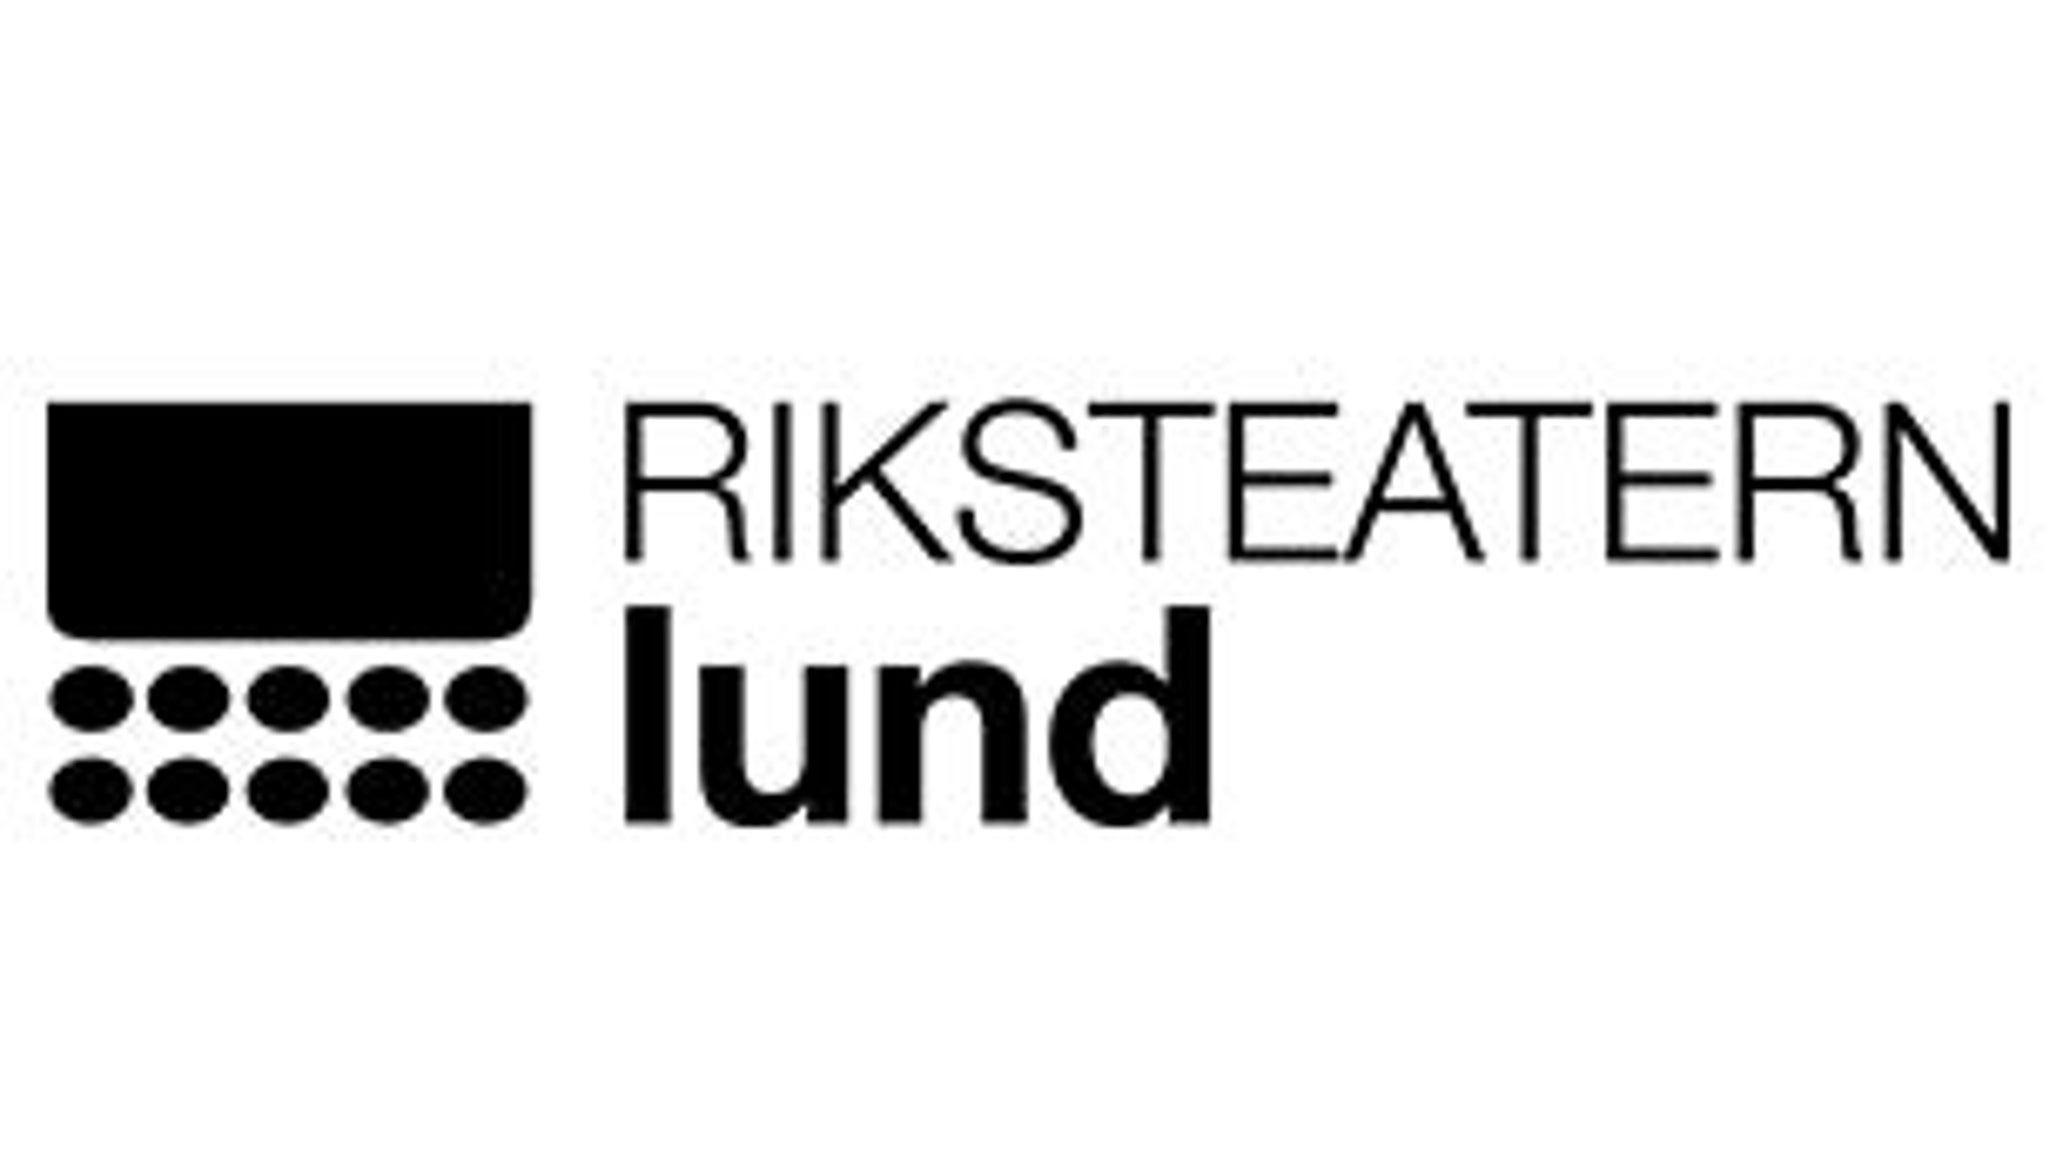 Lunds Teaterforening